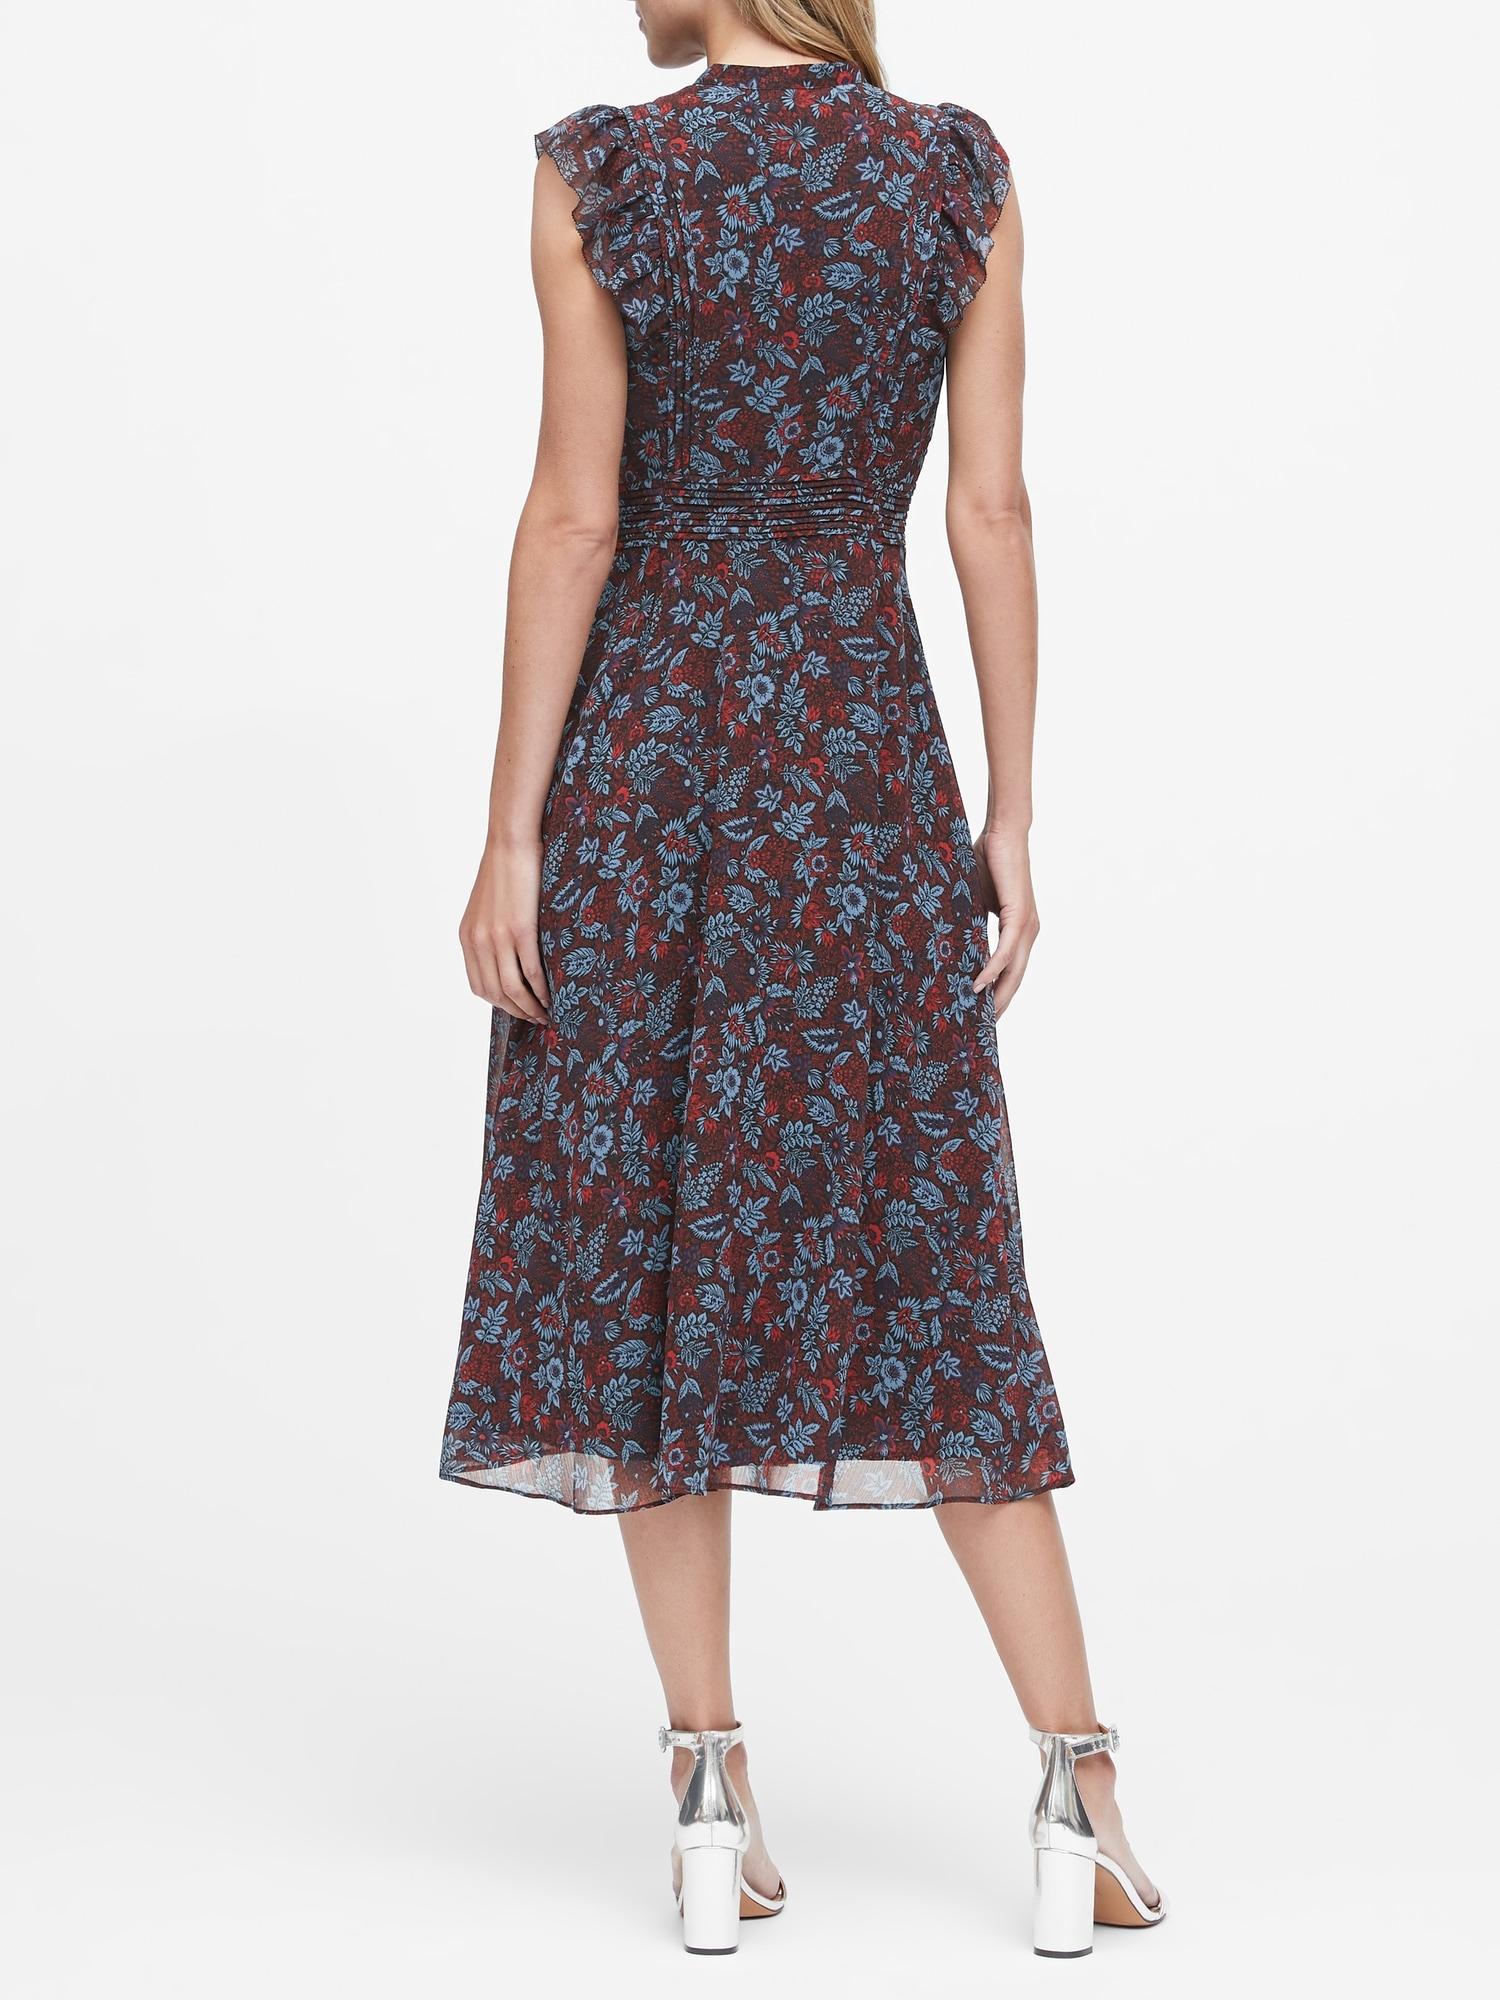 Banana Republic Lace Floral Fit-and-flare Dress in Blue - Lyst